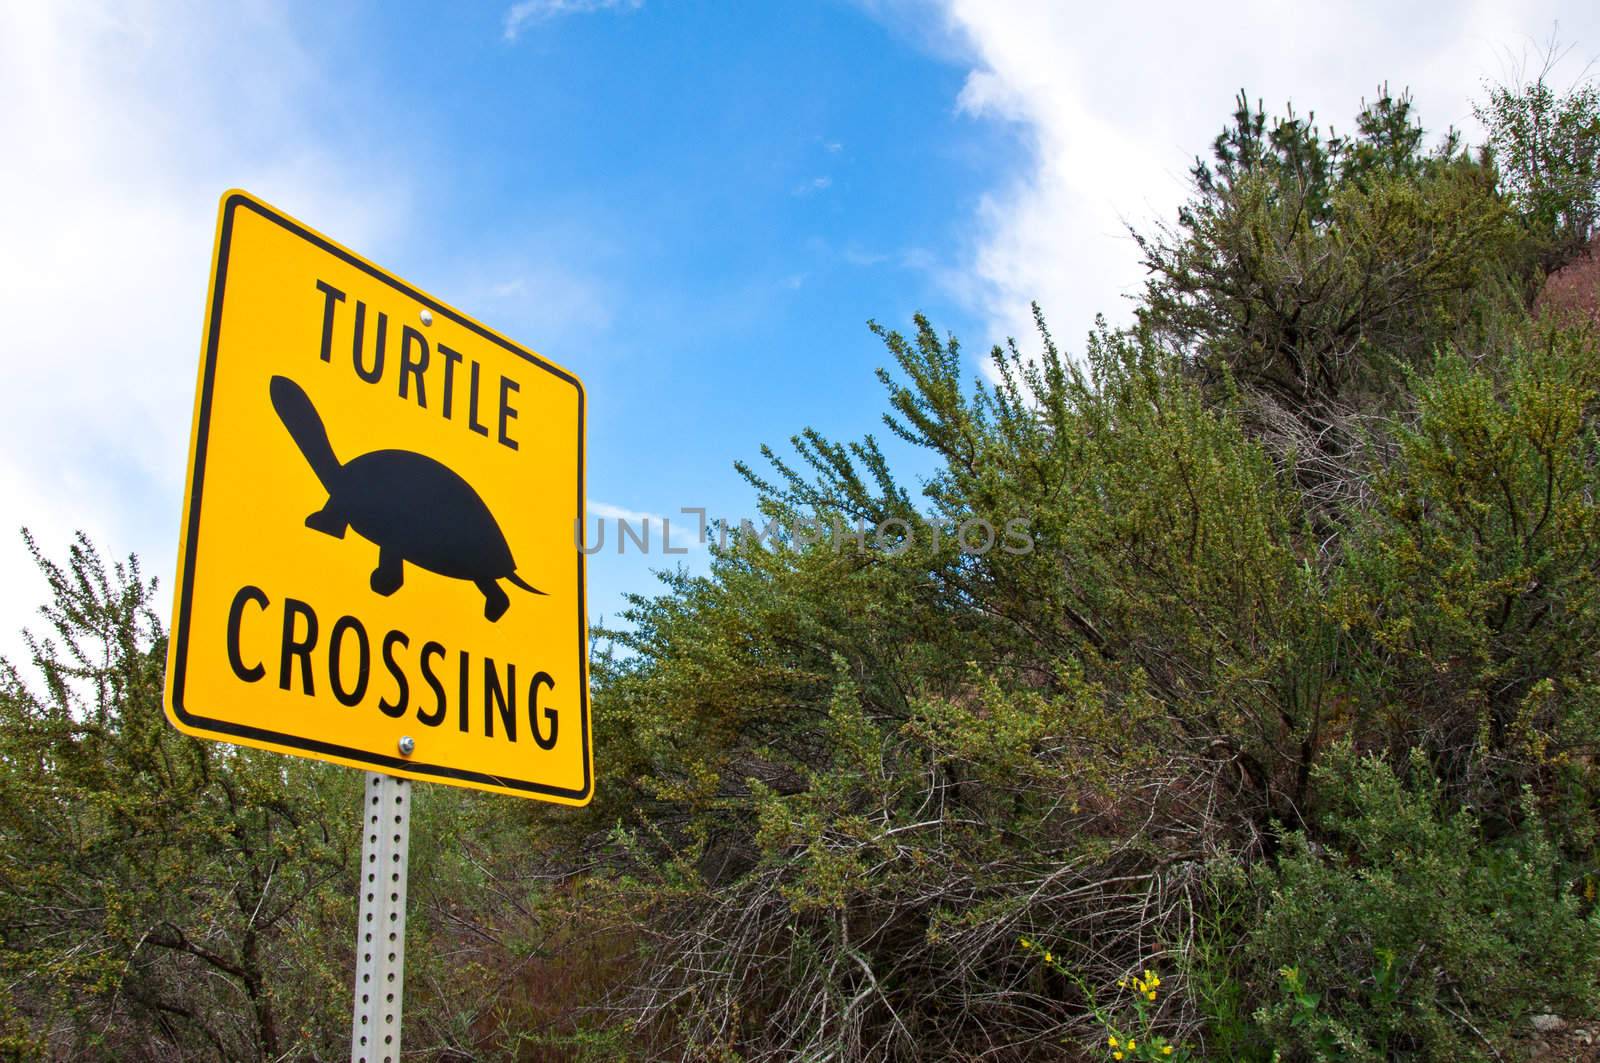 Unique turtle crossing sign in B.C. Canada with bright blue sky & clouds behind it.